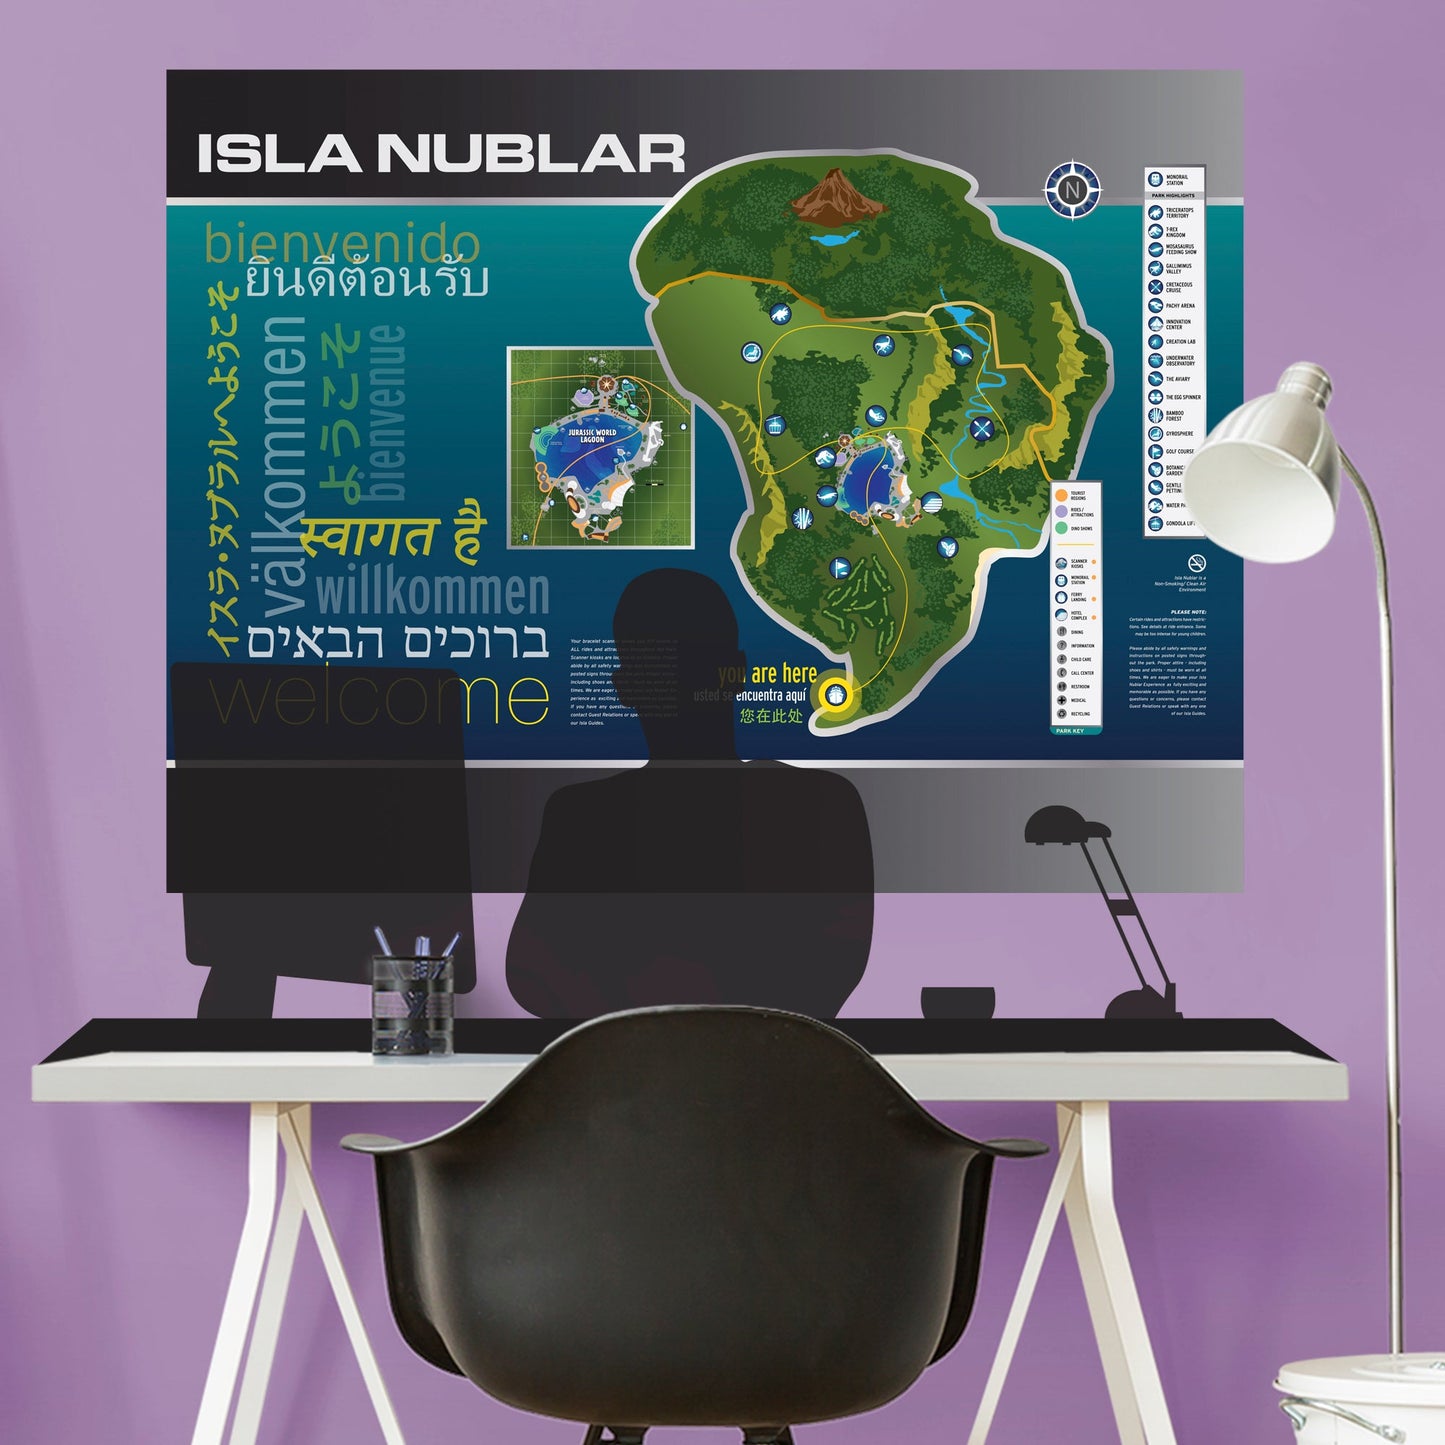 Jurassic World:  Isla Nubular Video Conference Mural        - Officially Licensed NBC Universal Removable Wall   Adhesive Decal